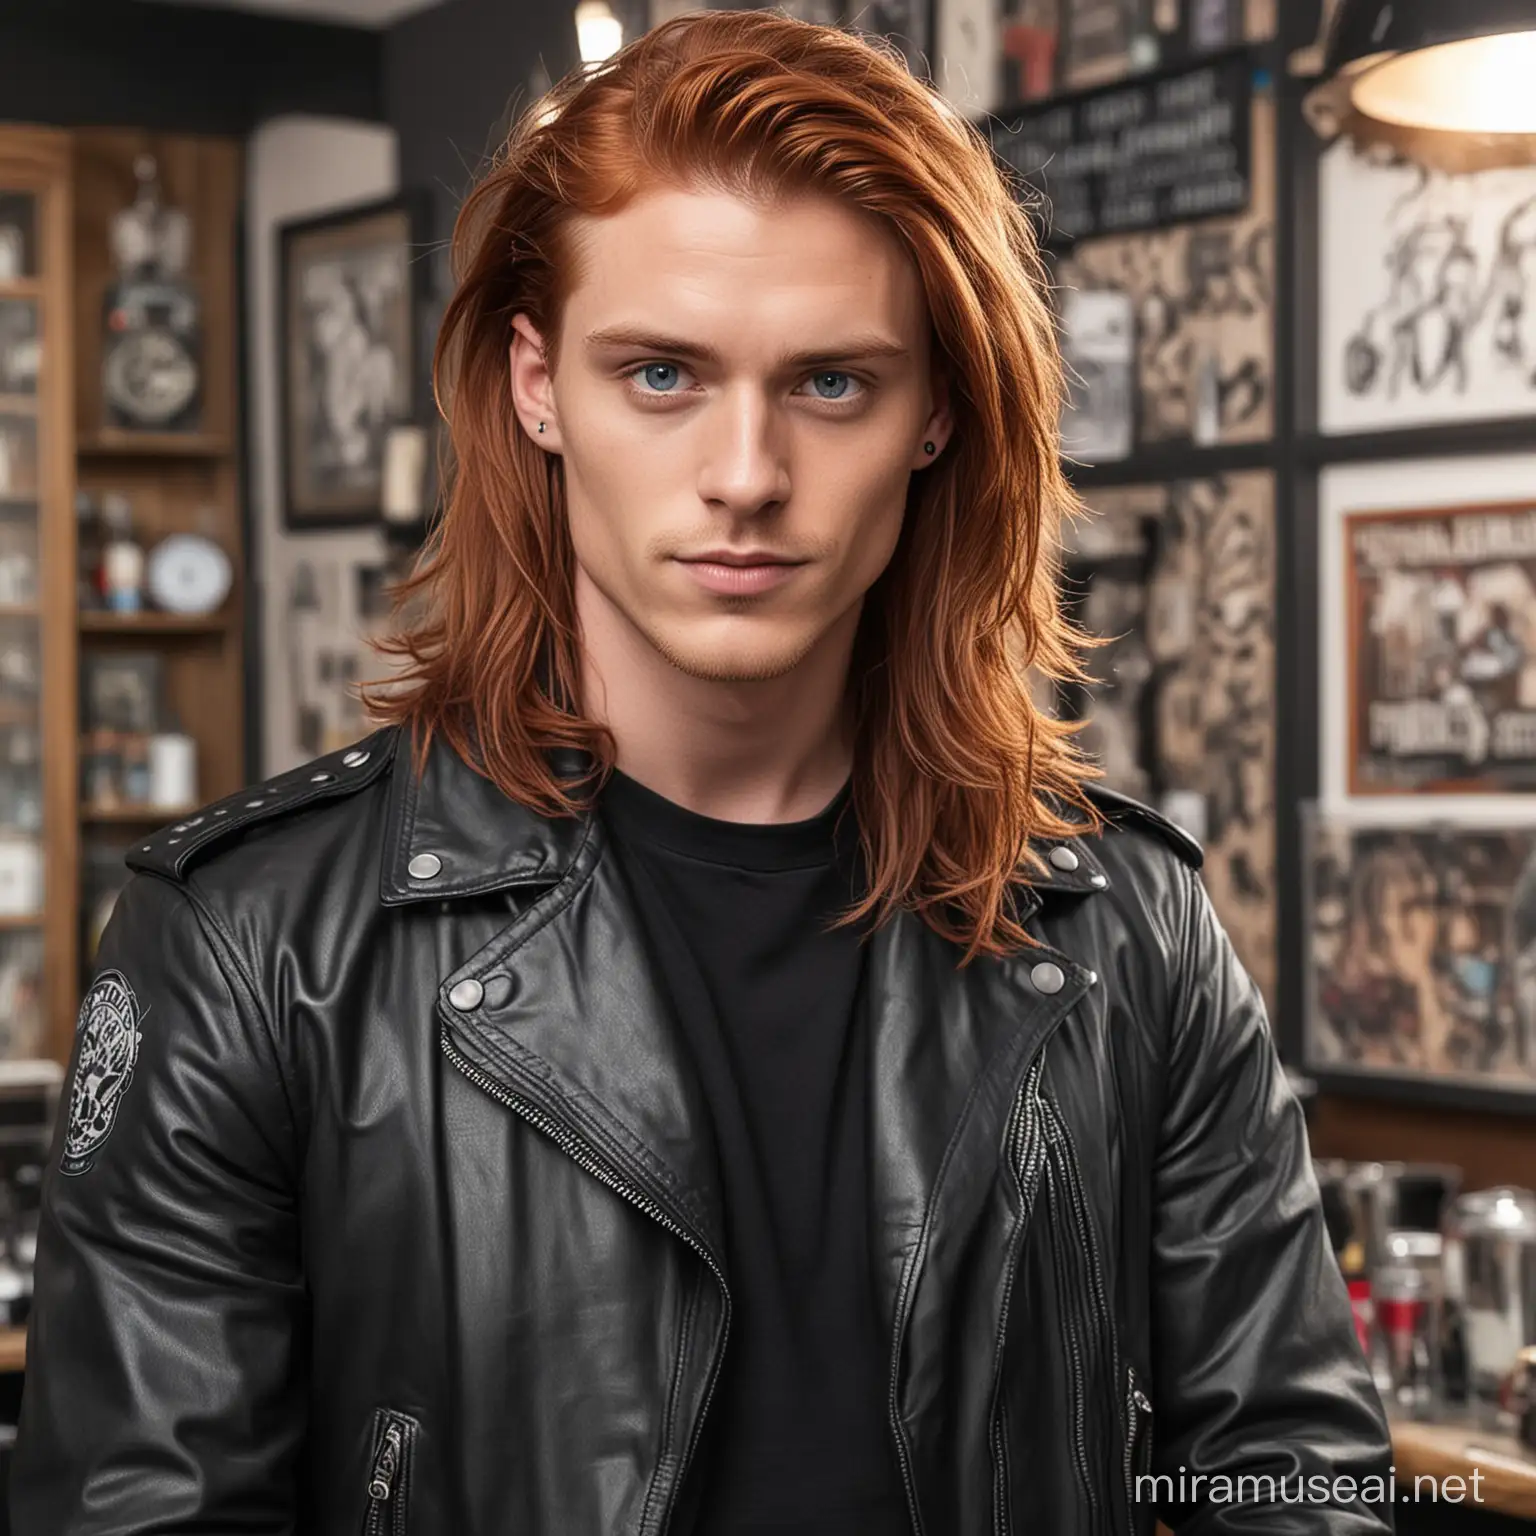 Stylish RedHaired Man in Leather Jacket at Tattoo Studio